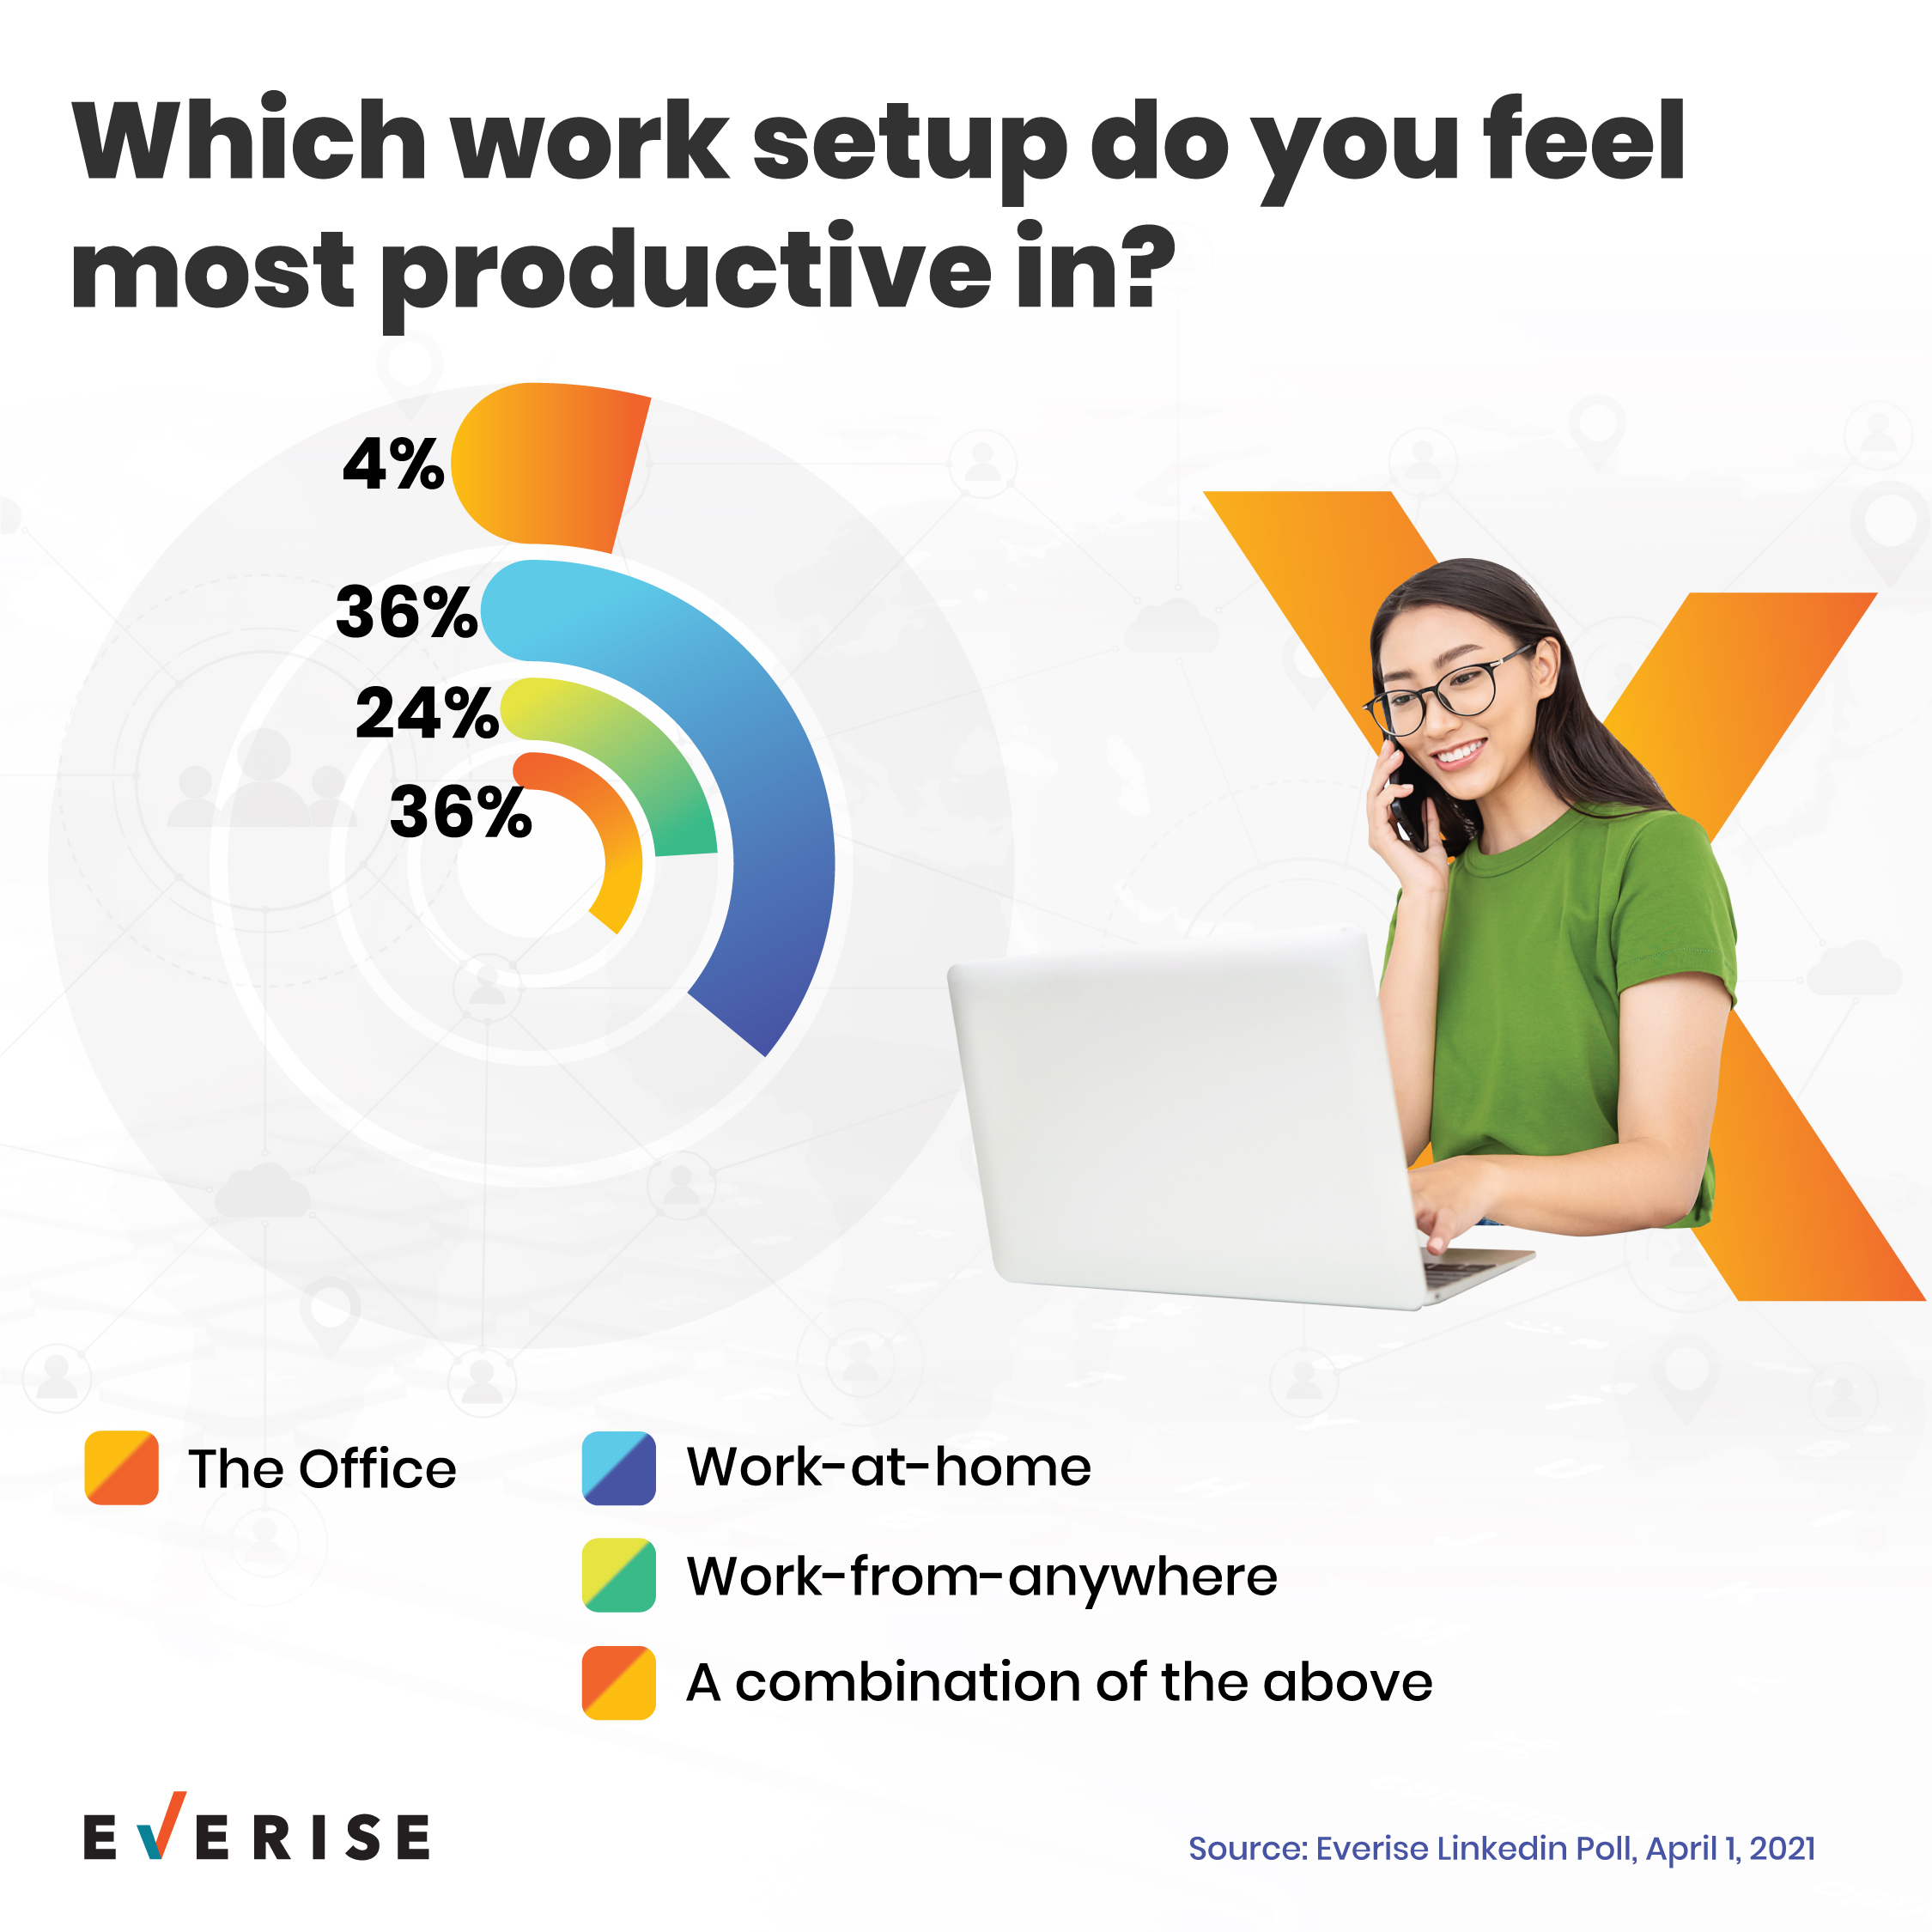 New Normal Work Setting Preferences